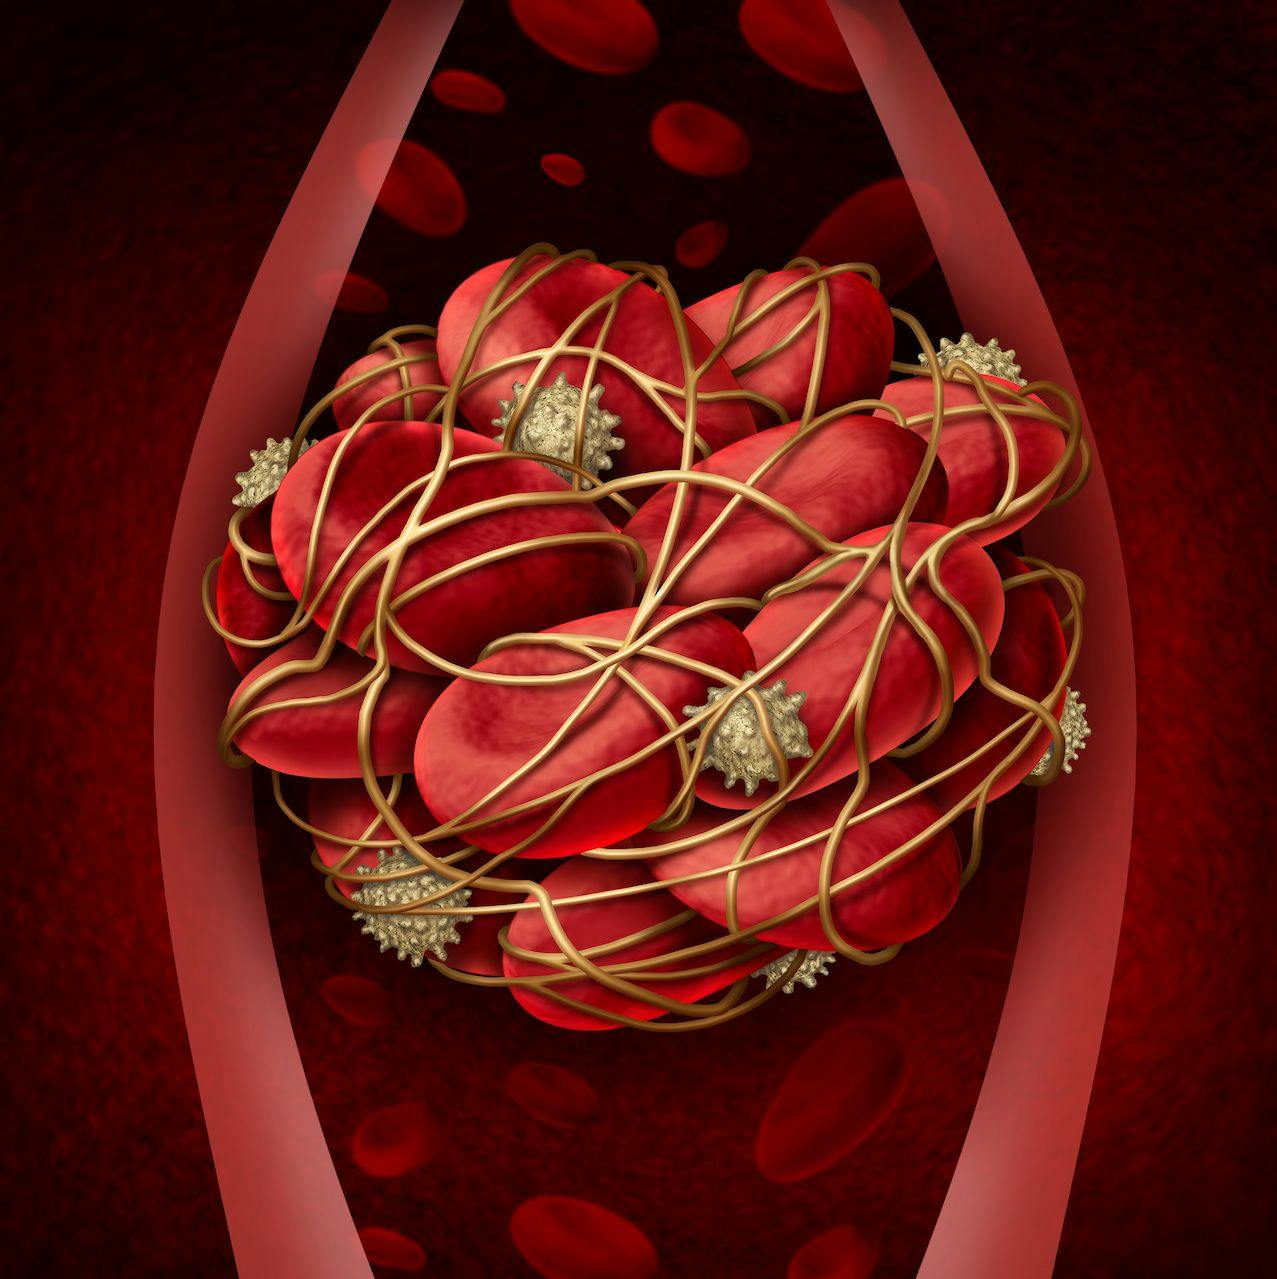 Persons Living With HIV Have a Higher Risk of Recurrent Blood Clots